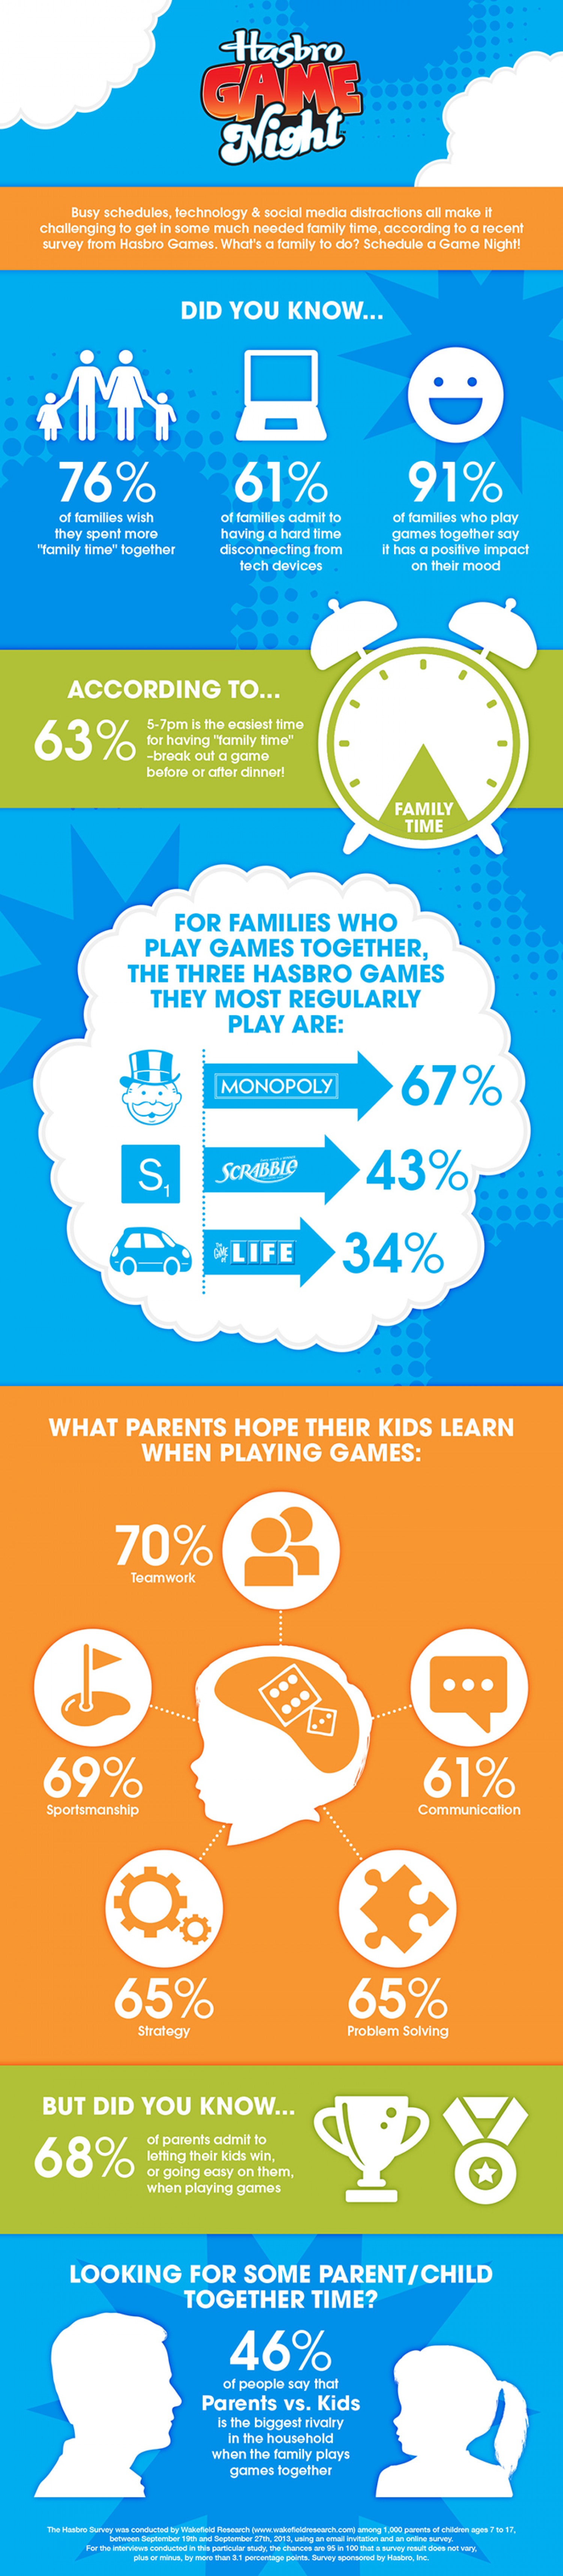 What are the benefits of playing games with your family? - SmartGames